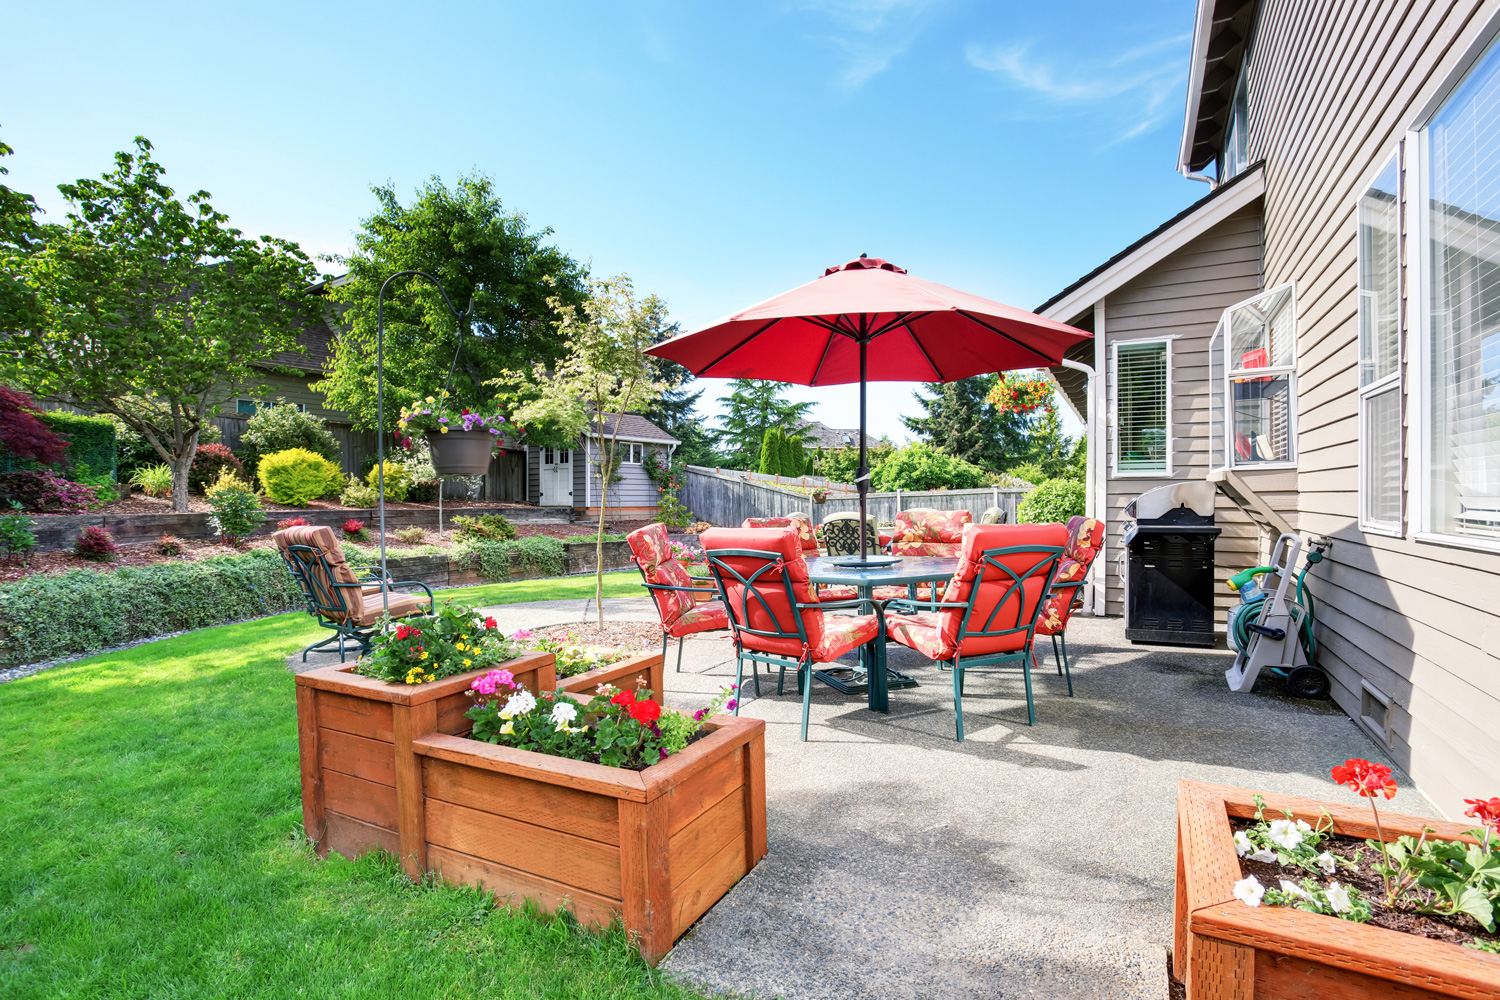 Well kept garden at backyard with concrete floor patio area and opened red umbrella. Northwest, USA